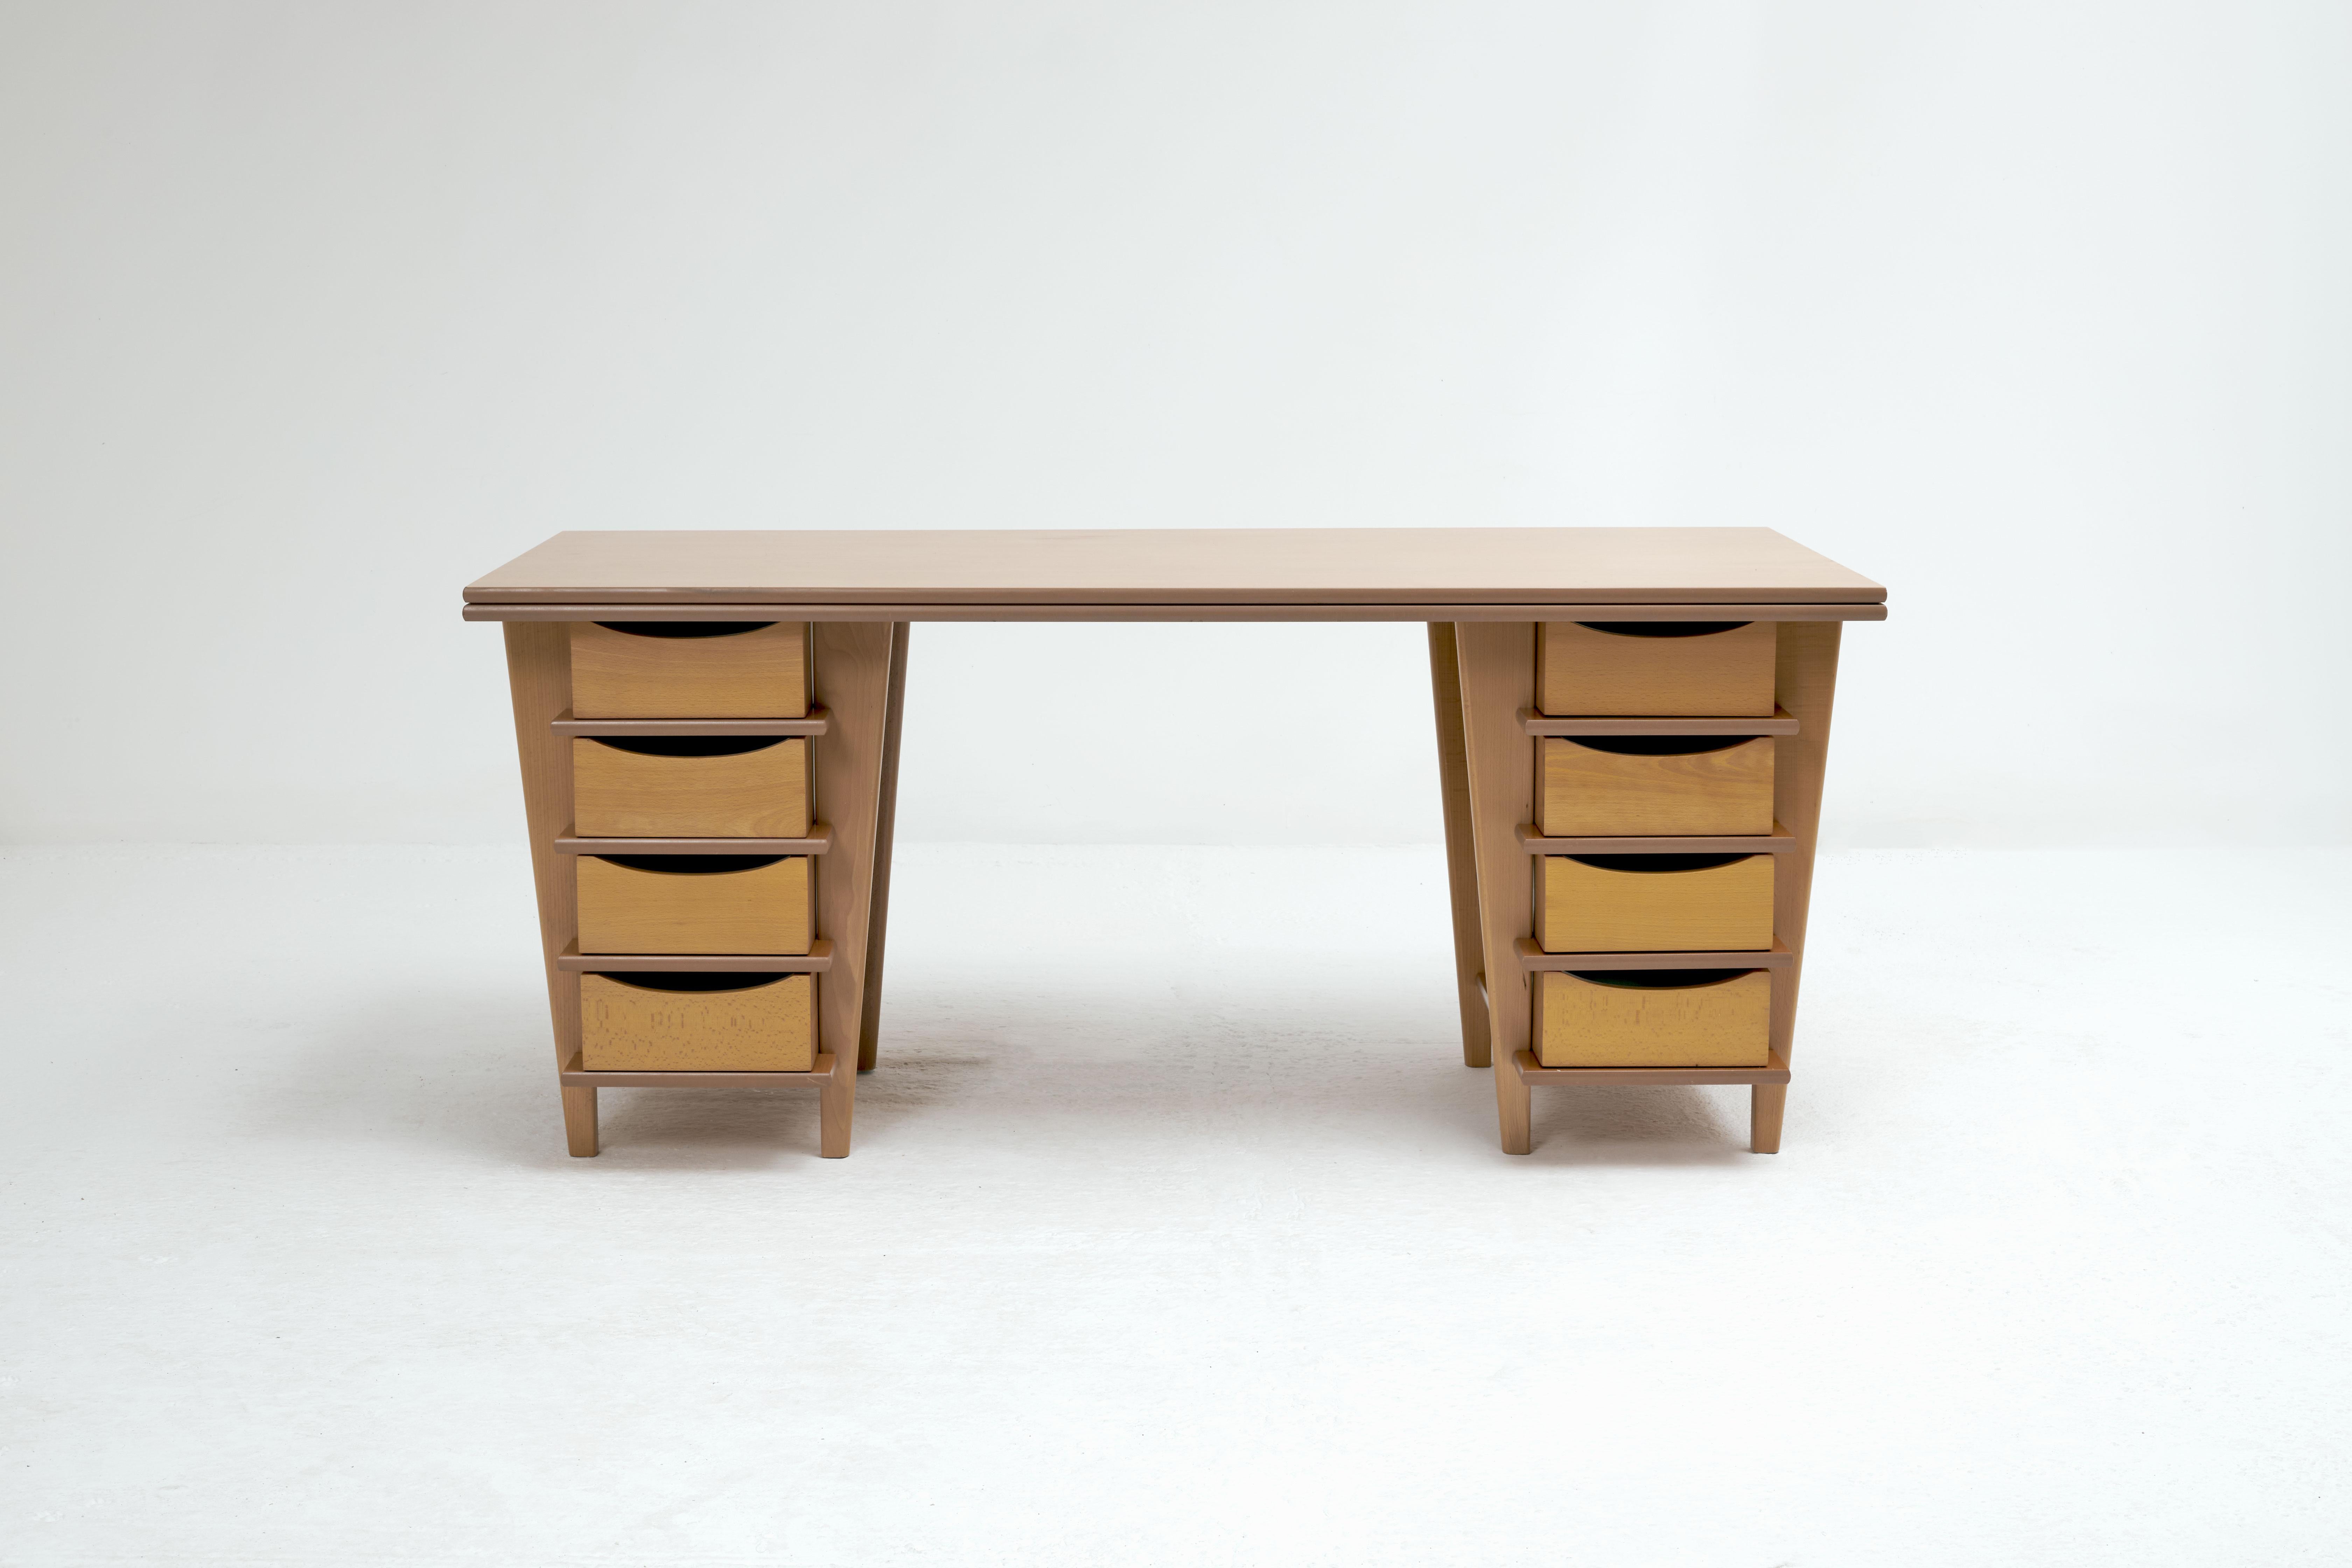 Double pedestal desk designed by Terence Conran, circa 1990’s. Made of a mixture of solid beech and beech veneer. The condition is good with some wear to the top consistent with age.

Dimensions: L170cm H76cm W75cm.